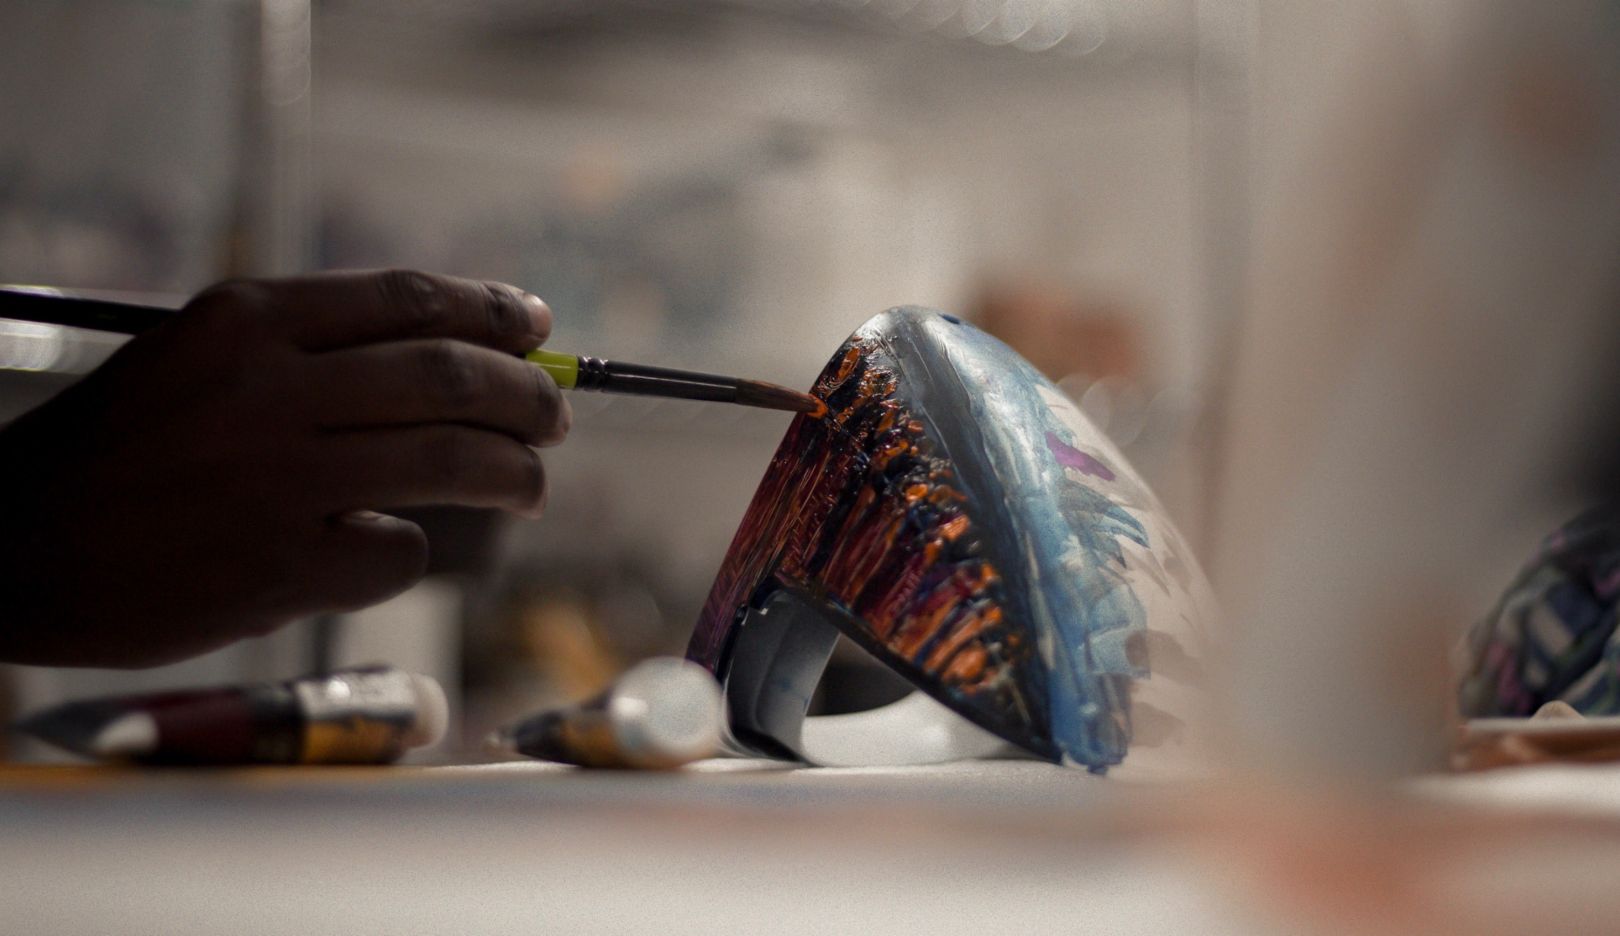 Nelson Makamo at work: The artist paints the side mirror of his Porsche 911 Carrera at his studio in Johannesburg.